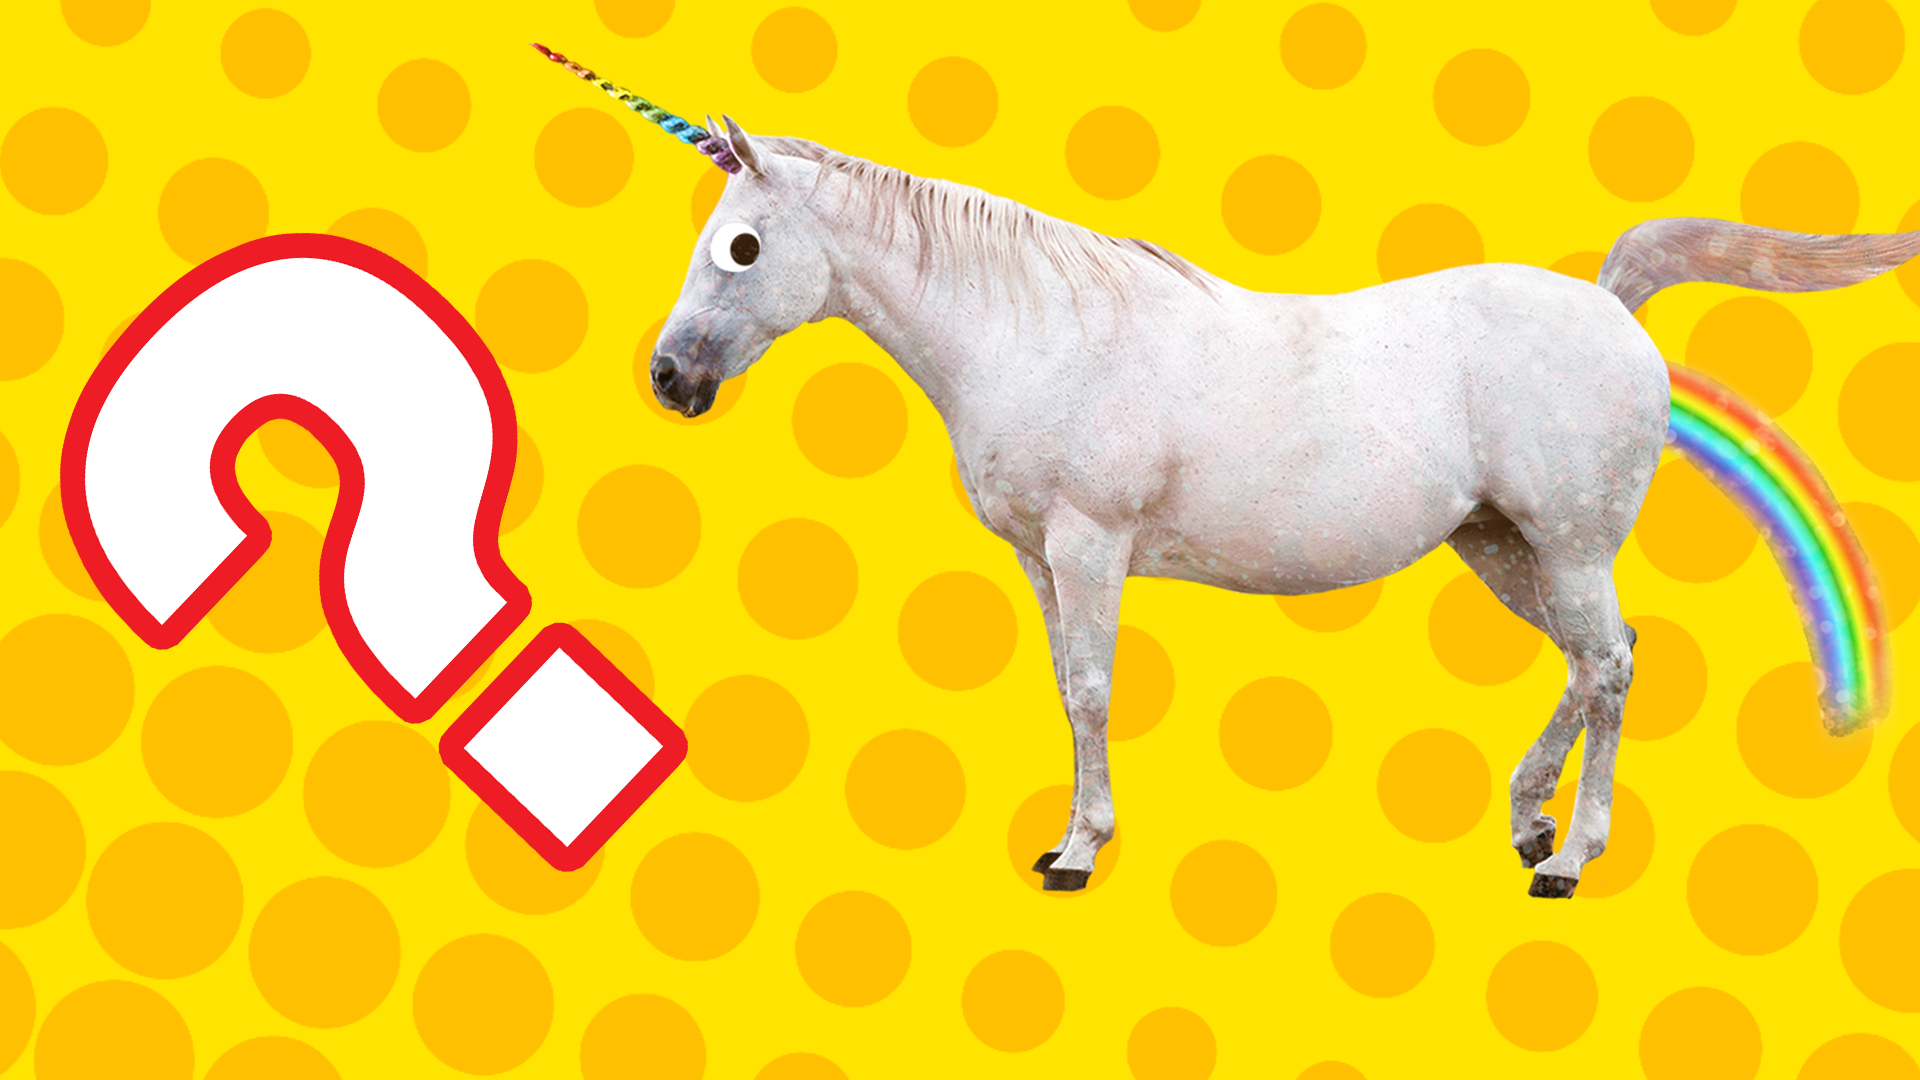 Unicorn farting a rainbow with question mark on yellow background